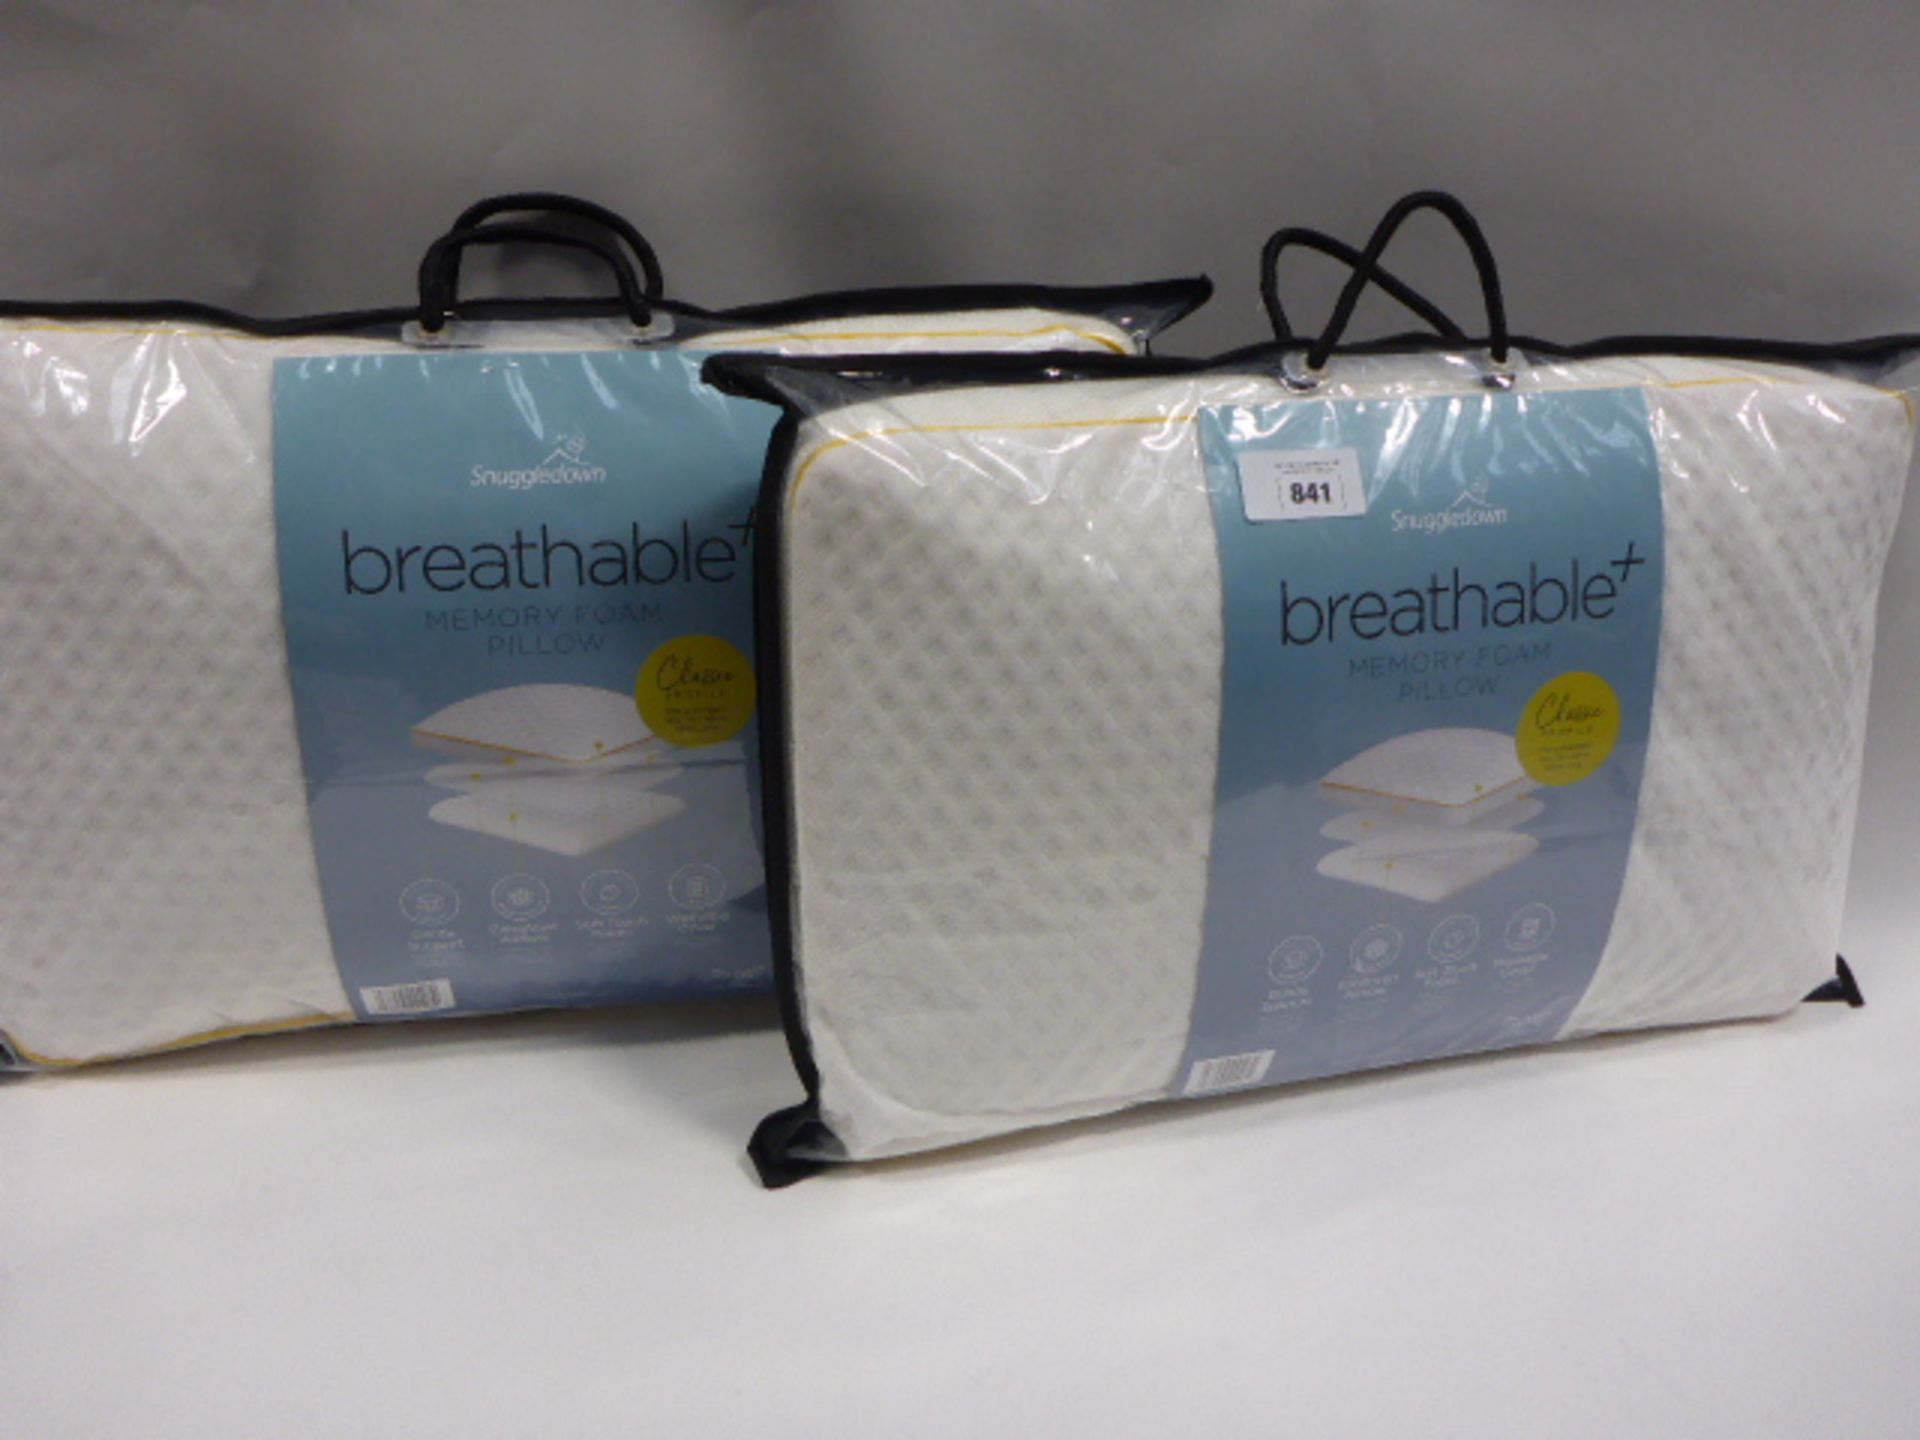 2 Snuggle Down breathable memory foam pillows